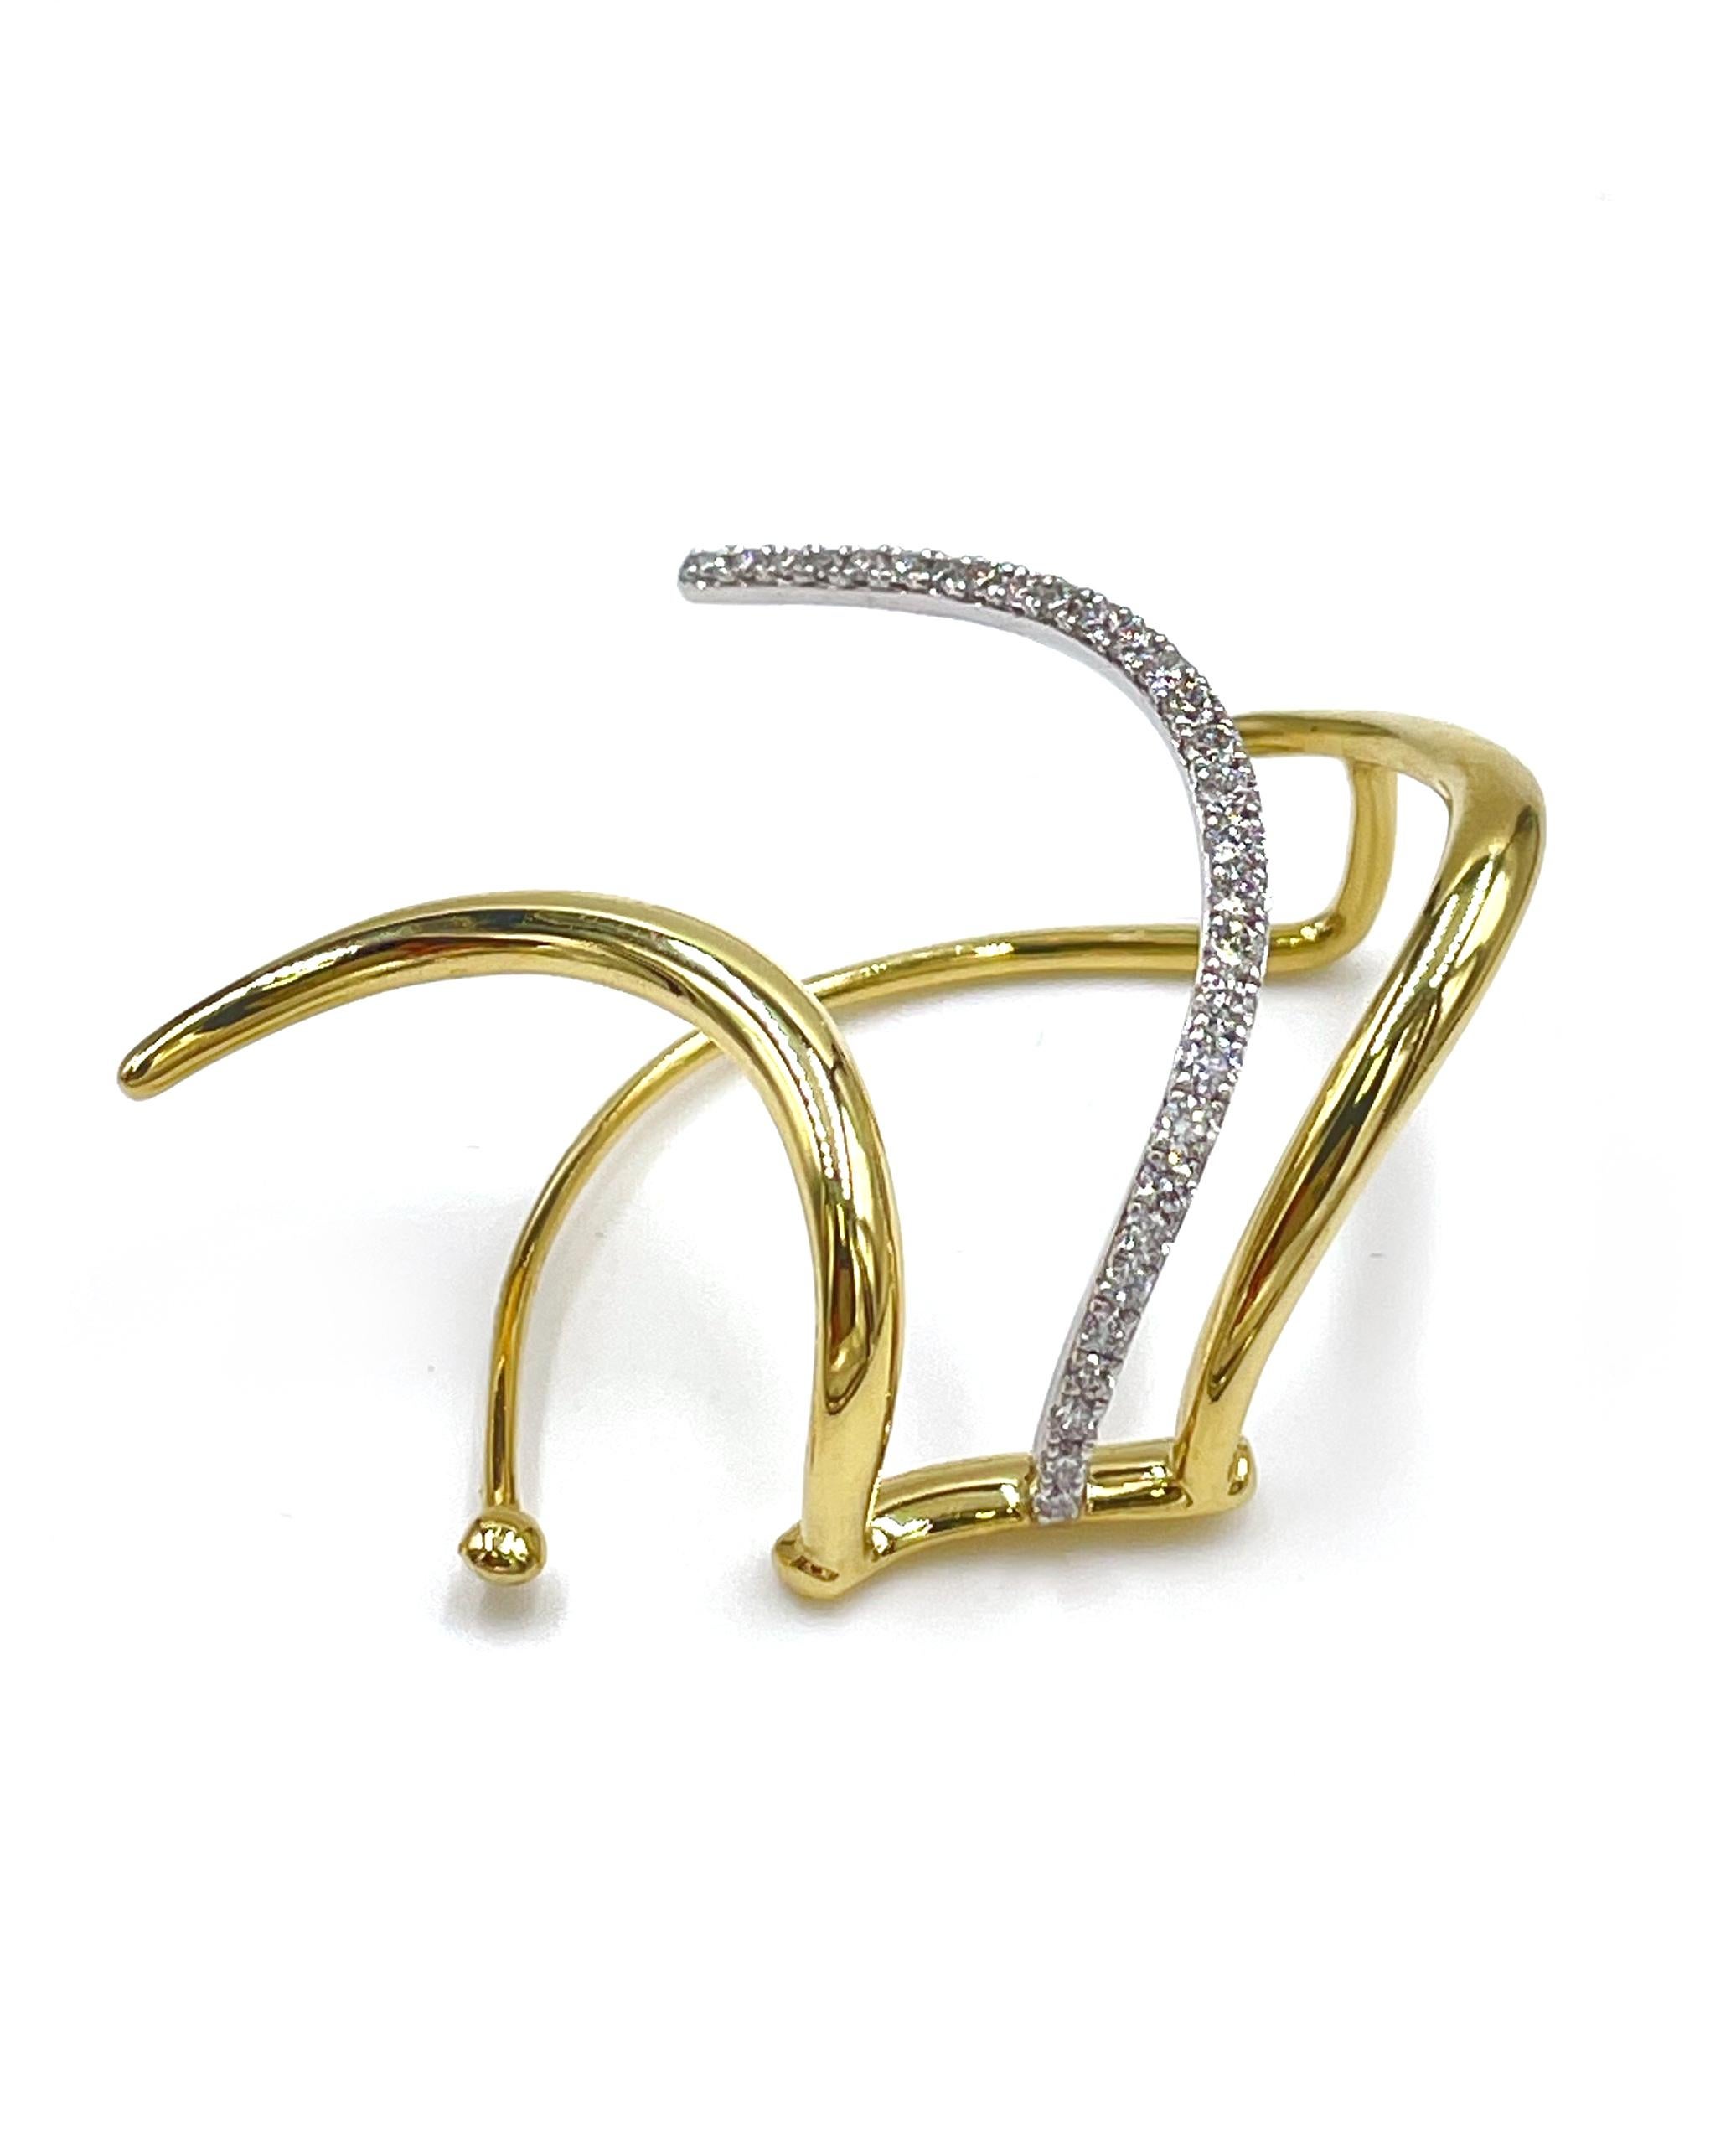 The perfect accessory to your earrings. Simon G. 18K yellow and white gold earring cuff with 30 round brilliant-cut diamonds 0.27 carat total weight. The cuff fits over one ear and does not go through a piercing. An elegant yet edgy compliment to